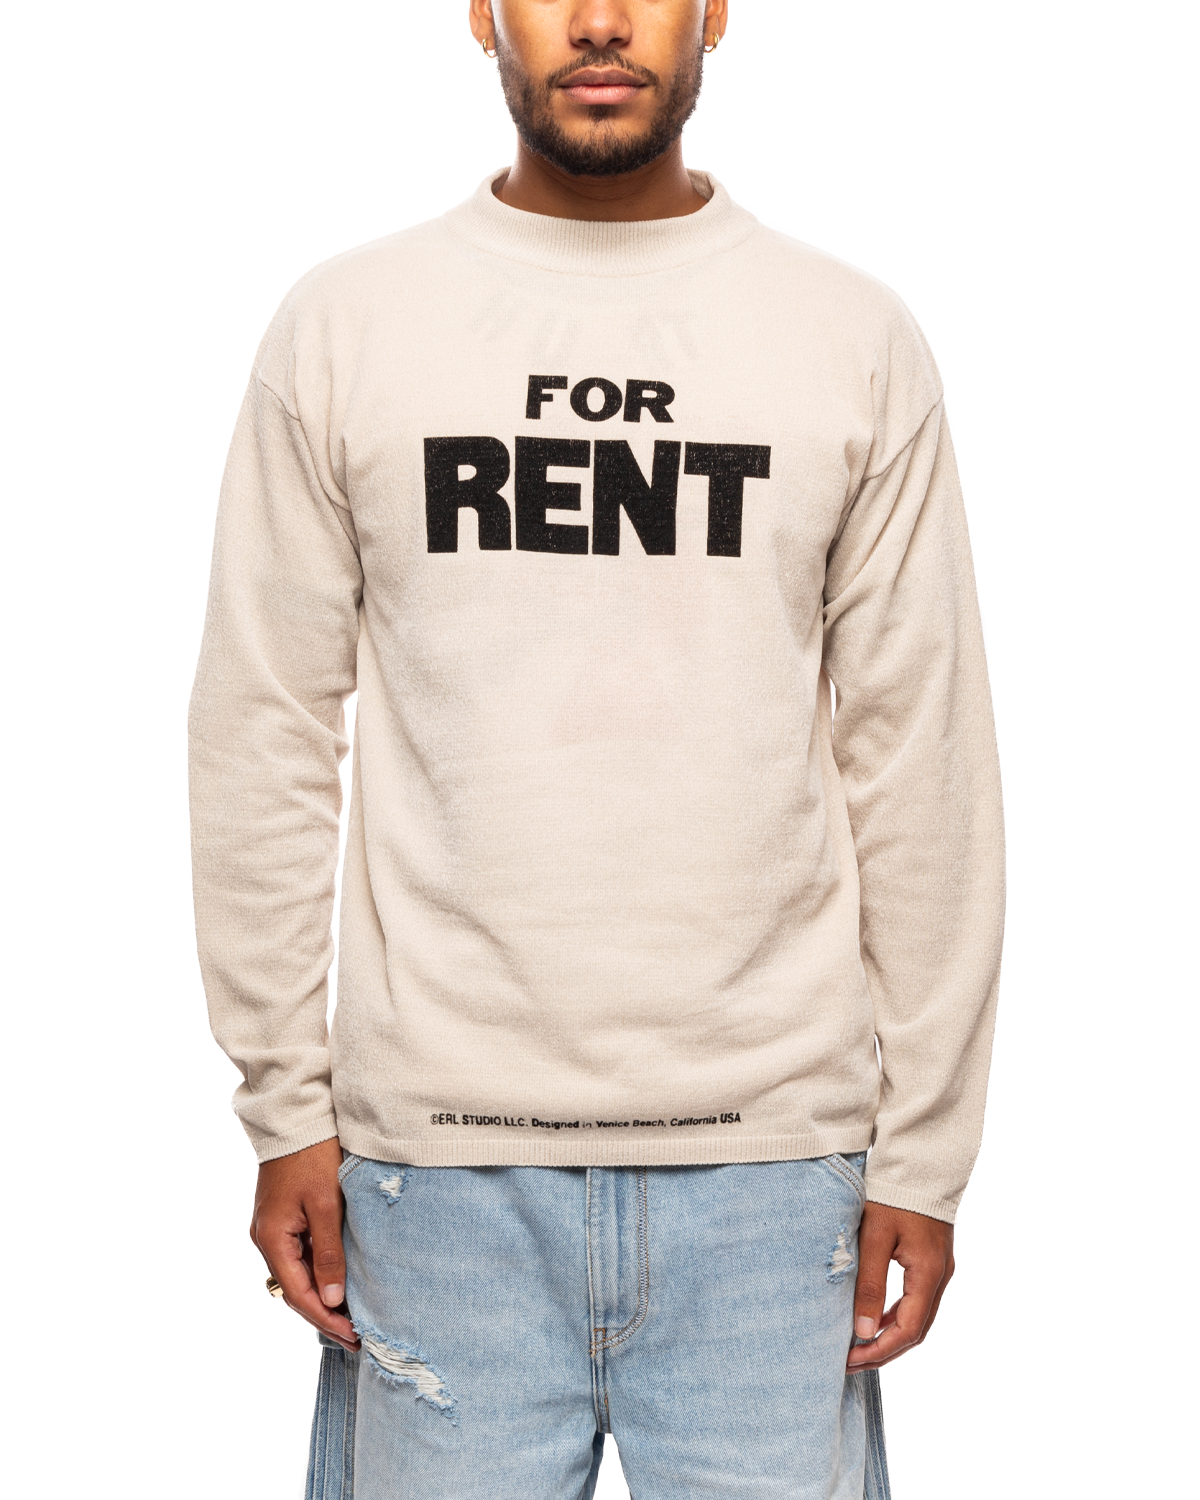 Unisex For Rent Sweater Knit White